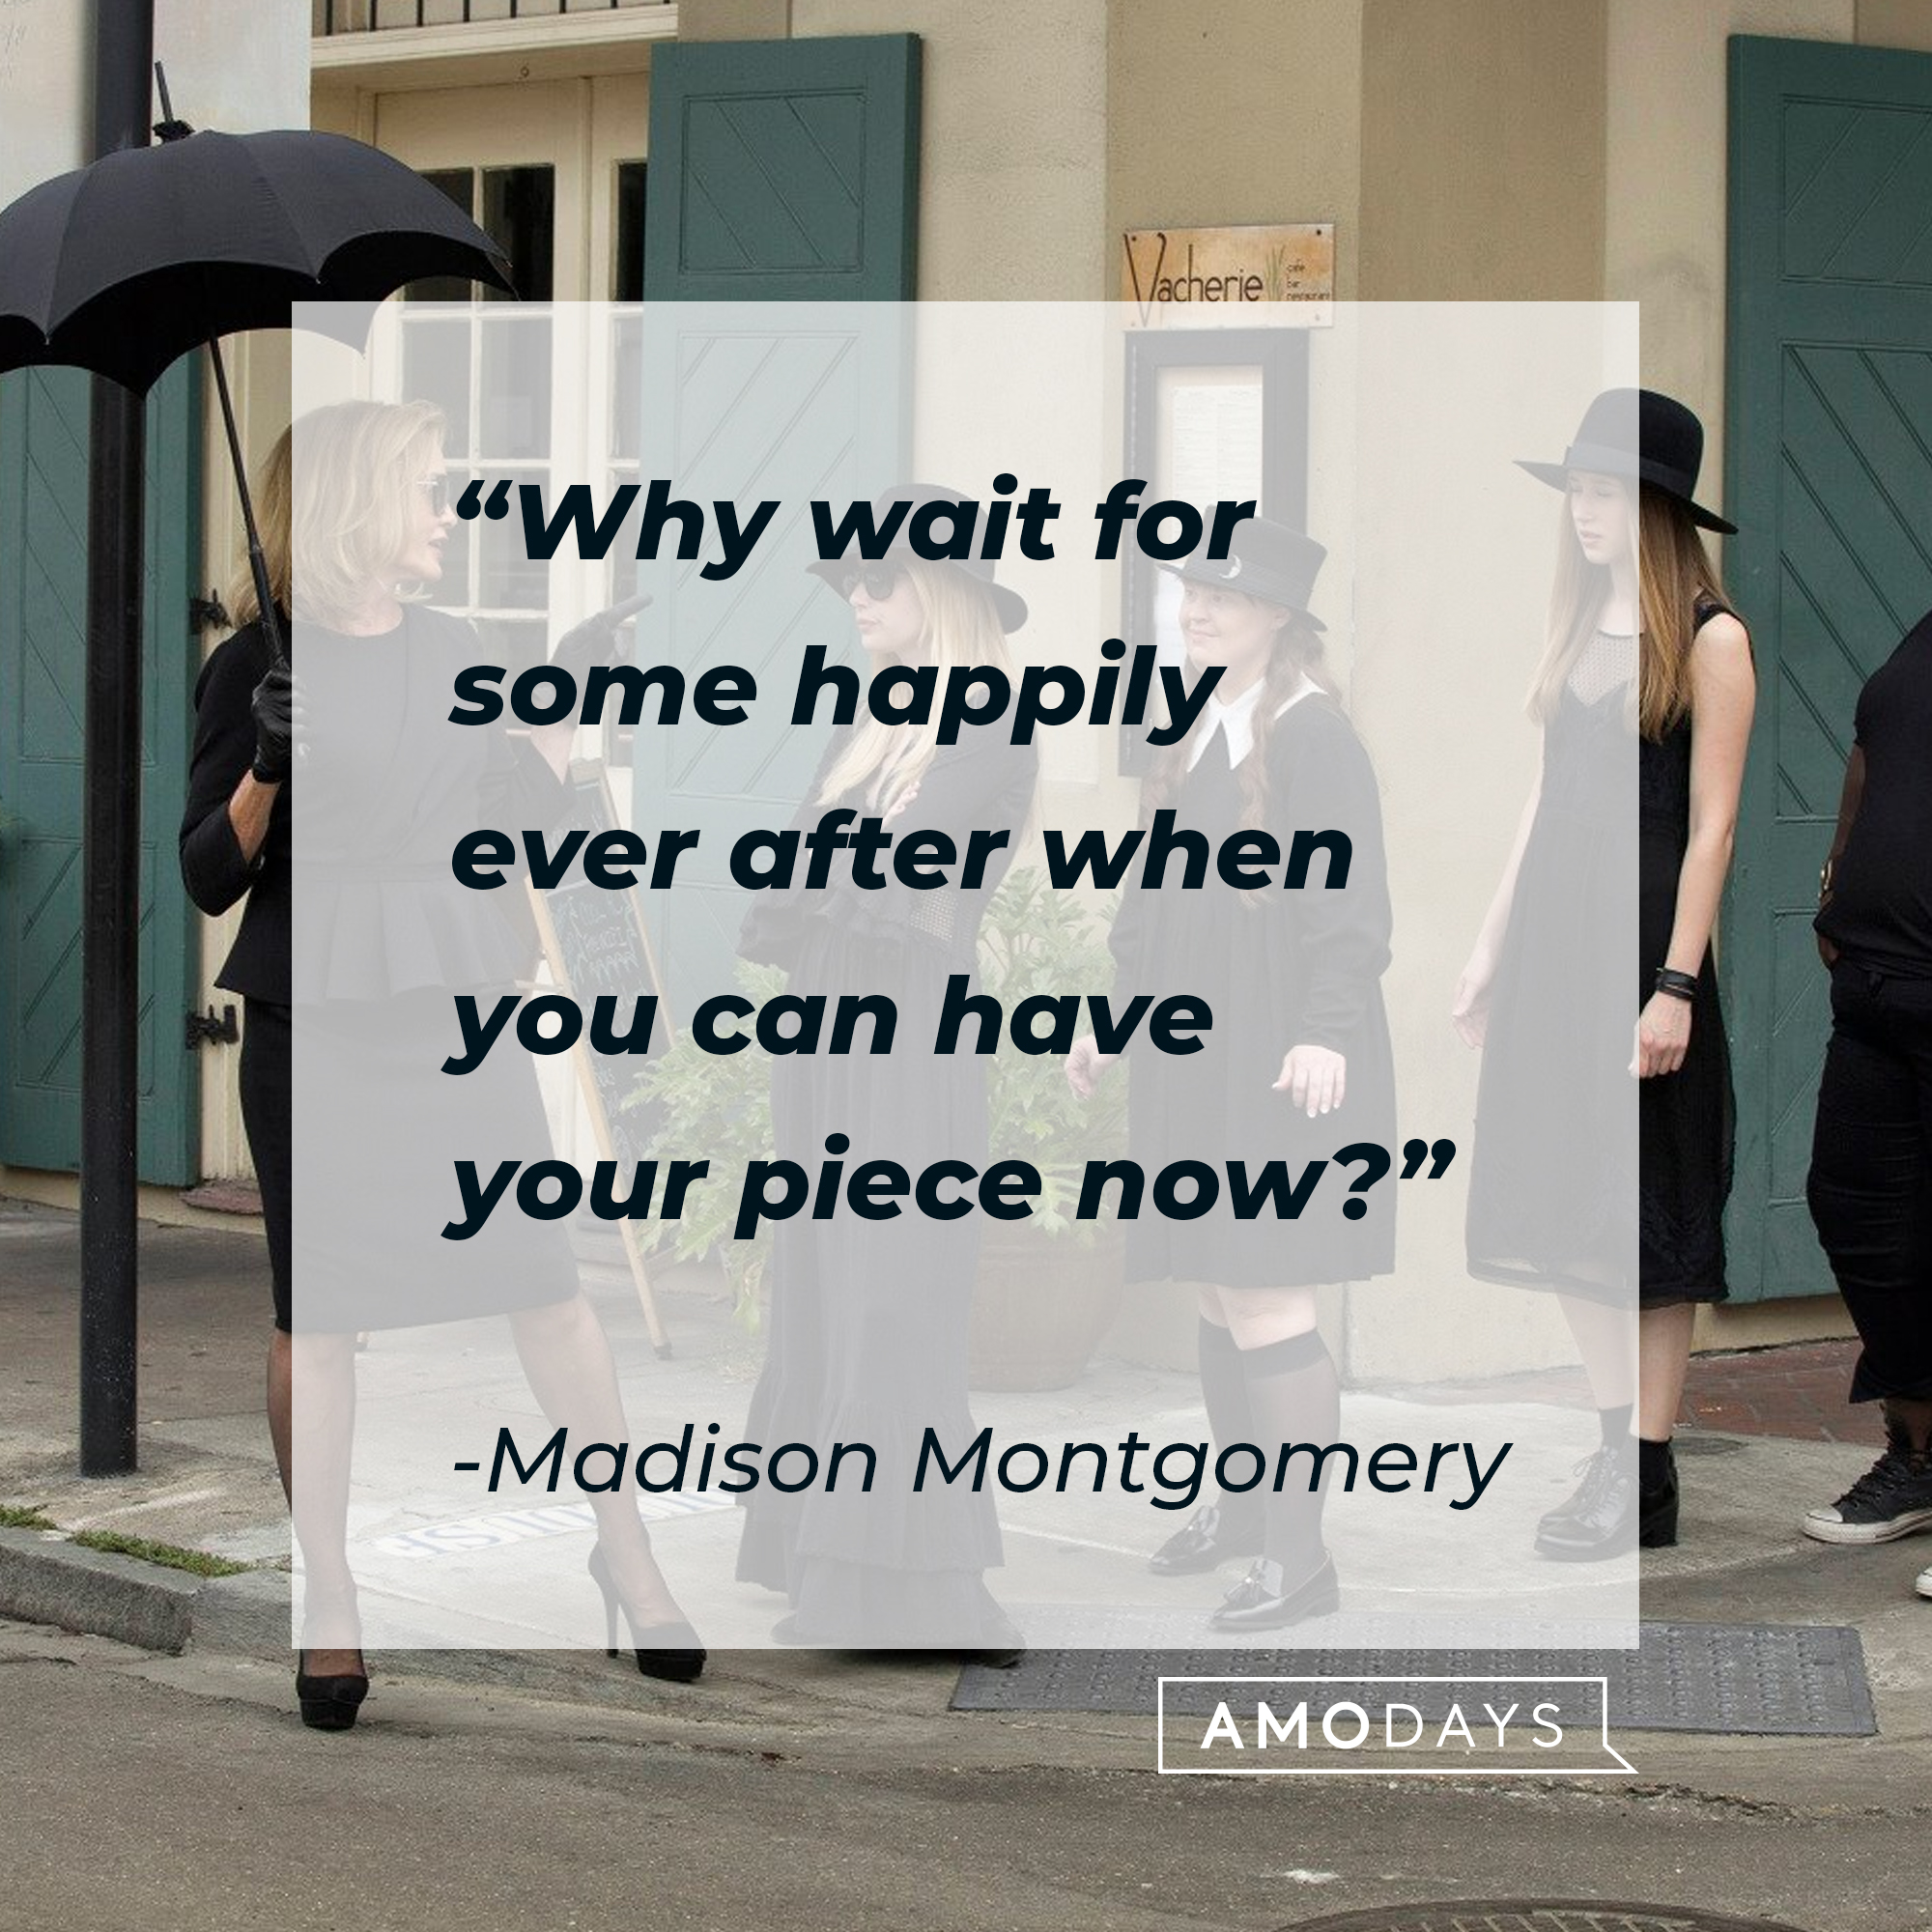 Madison's quote: "Why wait for some happily ever after when you can have your piece now?" | Source: facebook.com/americanhorrorstory